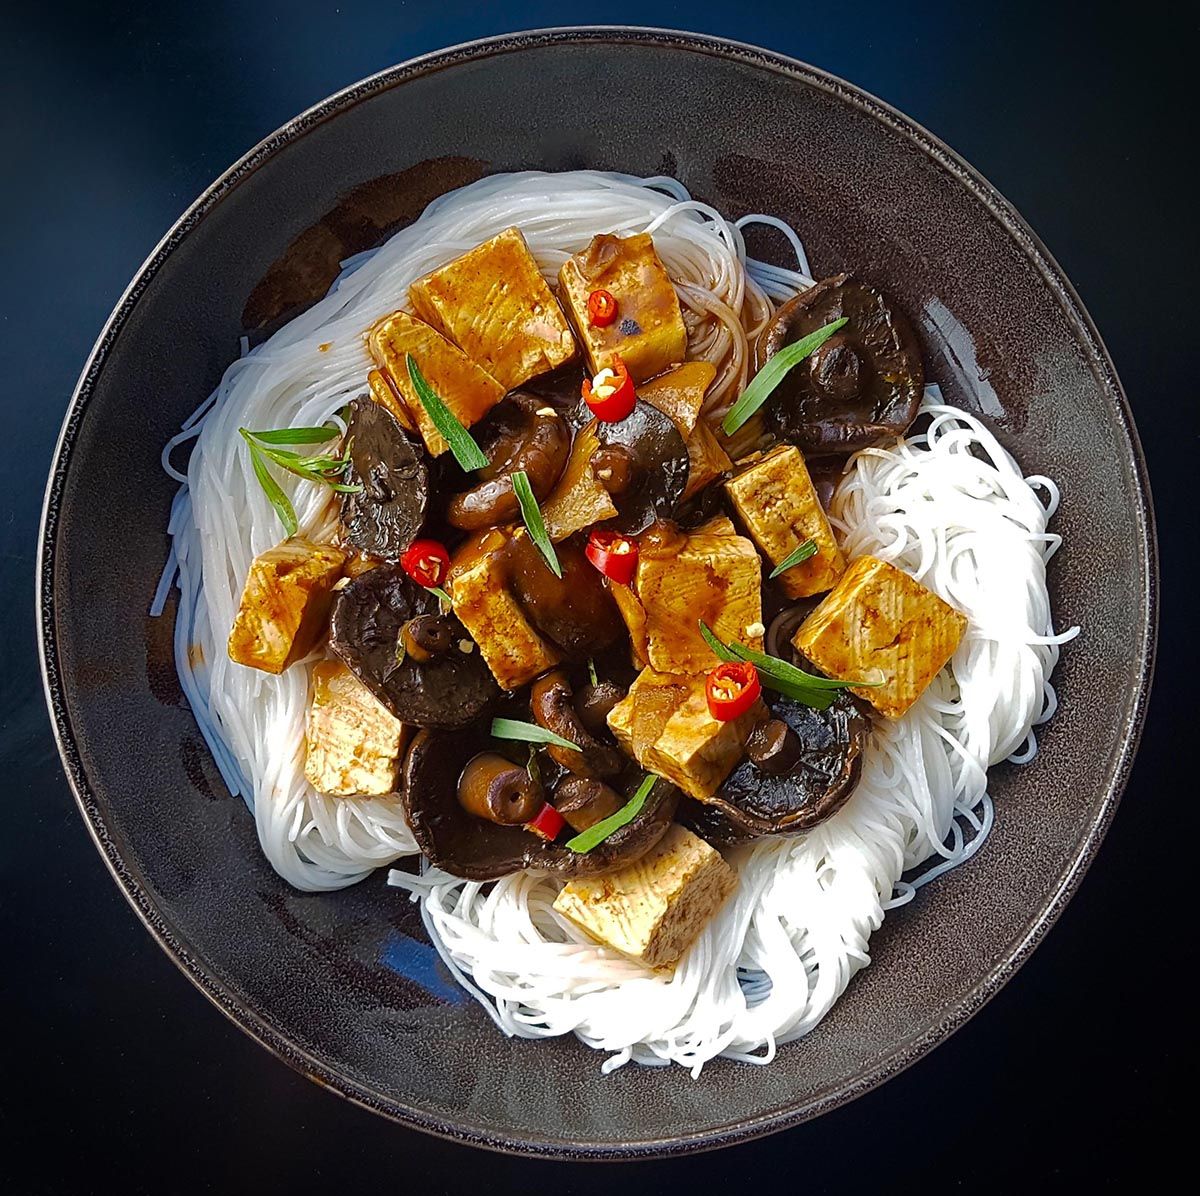 Braised Tofu and Vegetables with White Wine and Tarragon